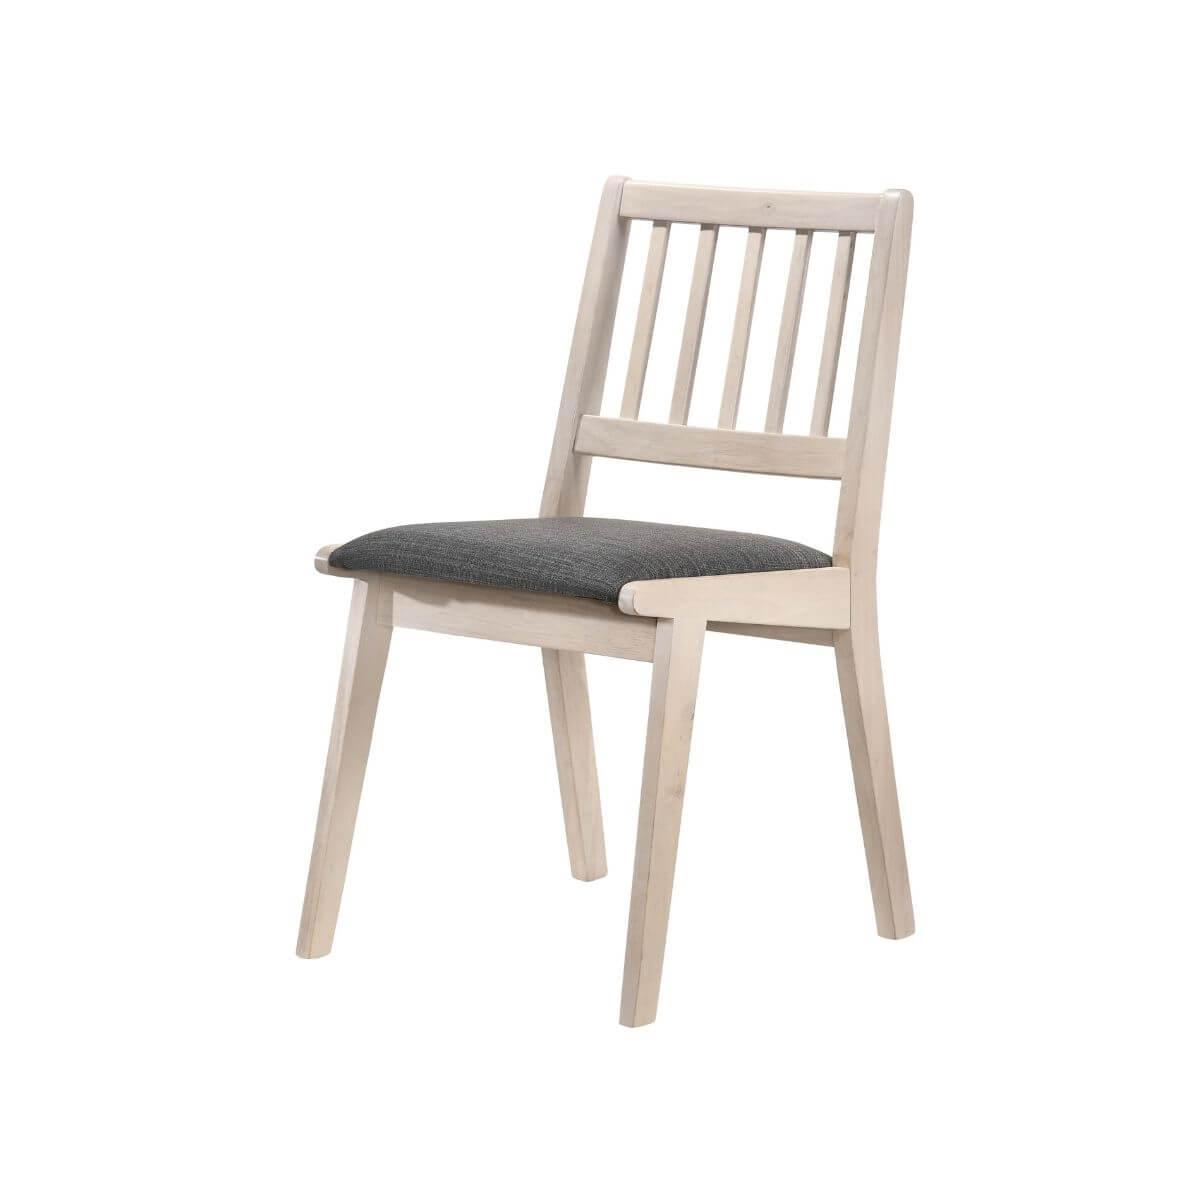 Harriette White Washed Oak Finish Dining Chair Set of 2-Upinteriors